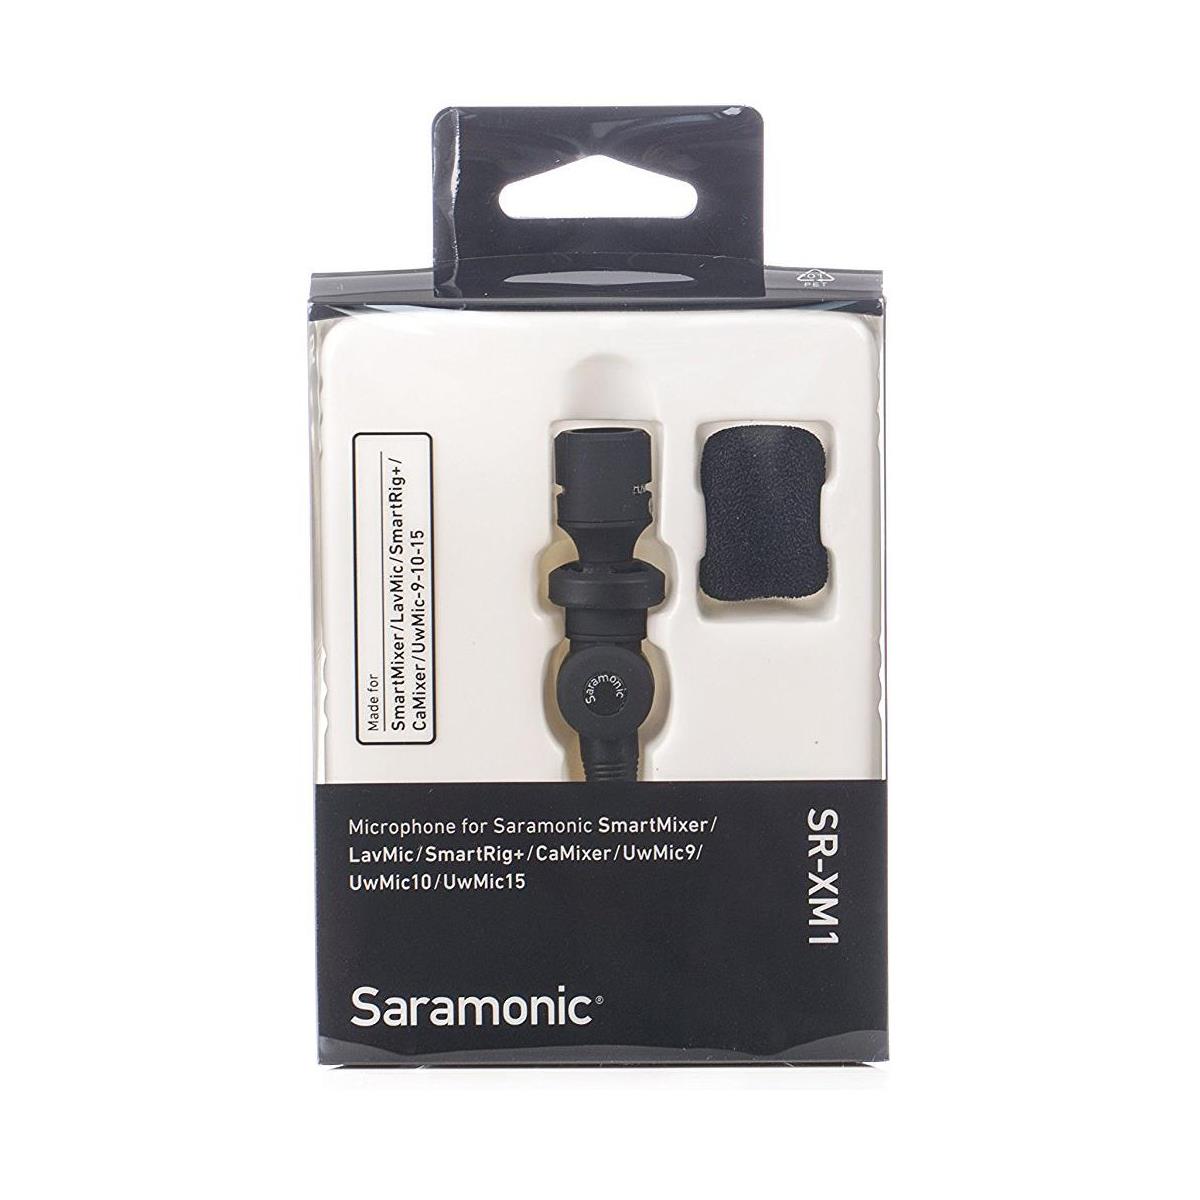 Saramonic SR-XM1Ultra Compact Broadcast Quality Omnidirectional Condenser Mini Microphone for Cameras, DJI Osmo, GoPro 7 6 5 3.5mm TRS